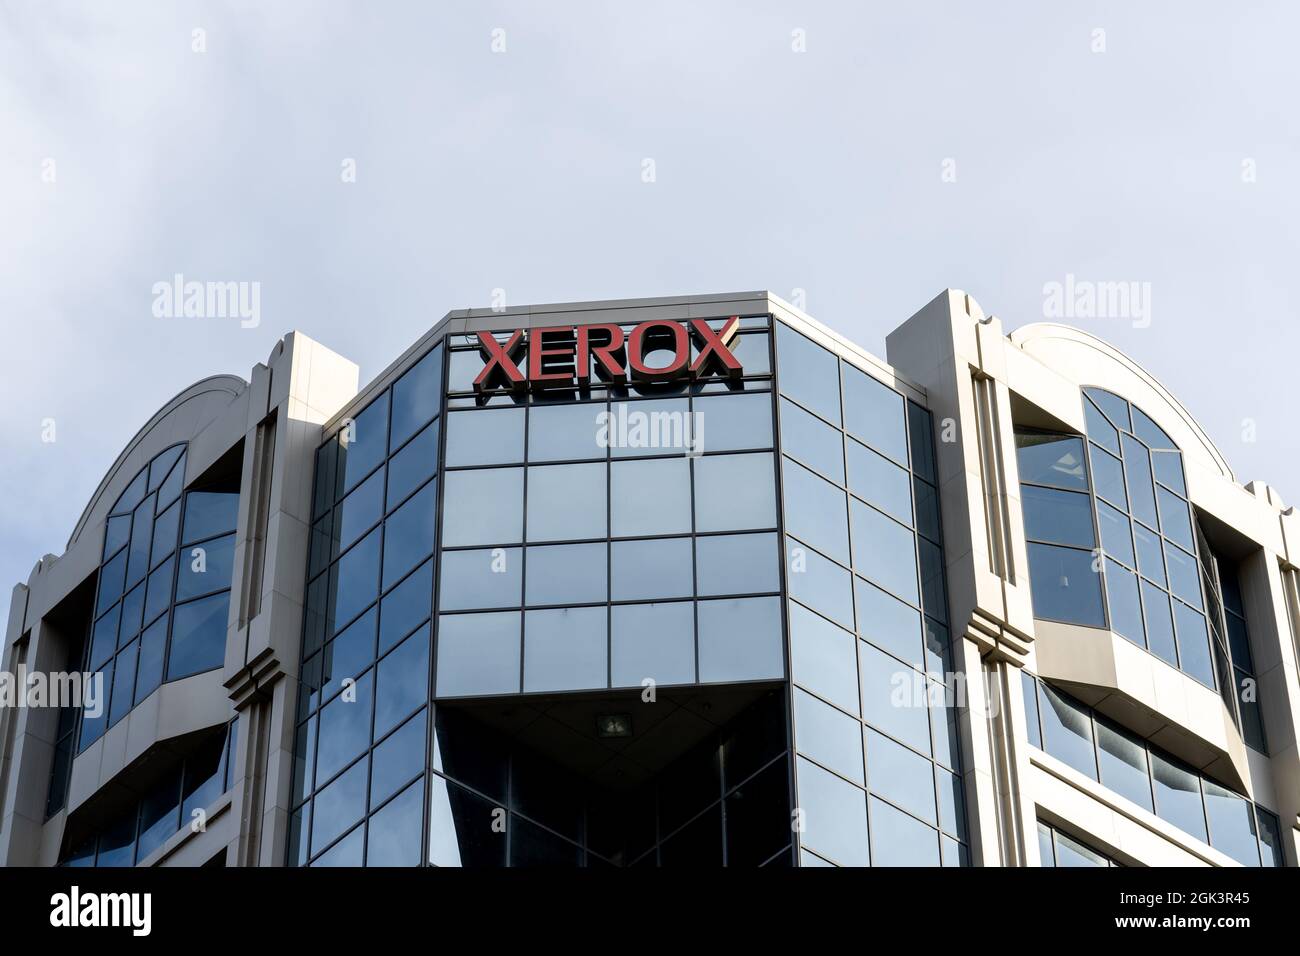 Montreal, QC, Canada - September 4, 2021: Close up of Xerox sign at their office in Montreal, QC, Canada. Stock Photo